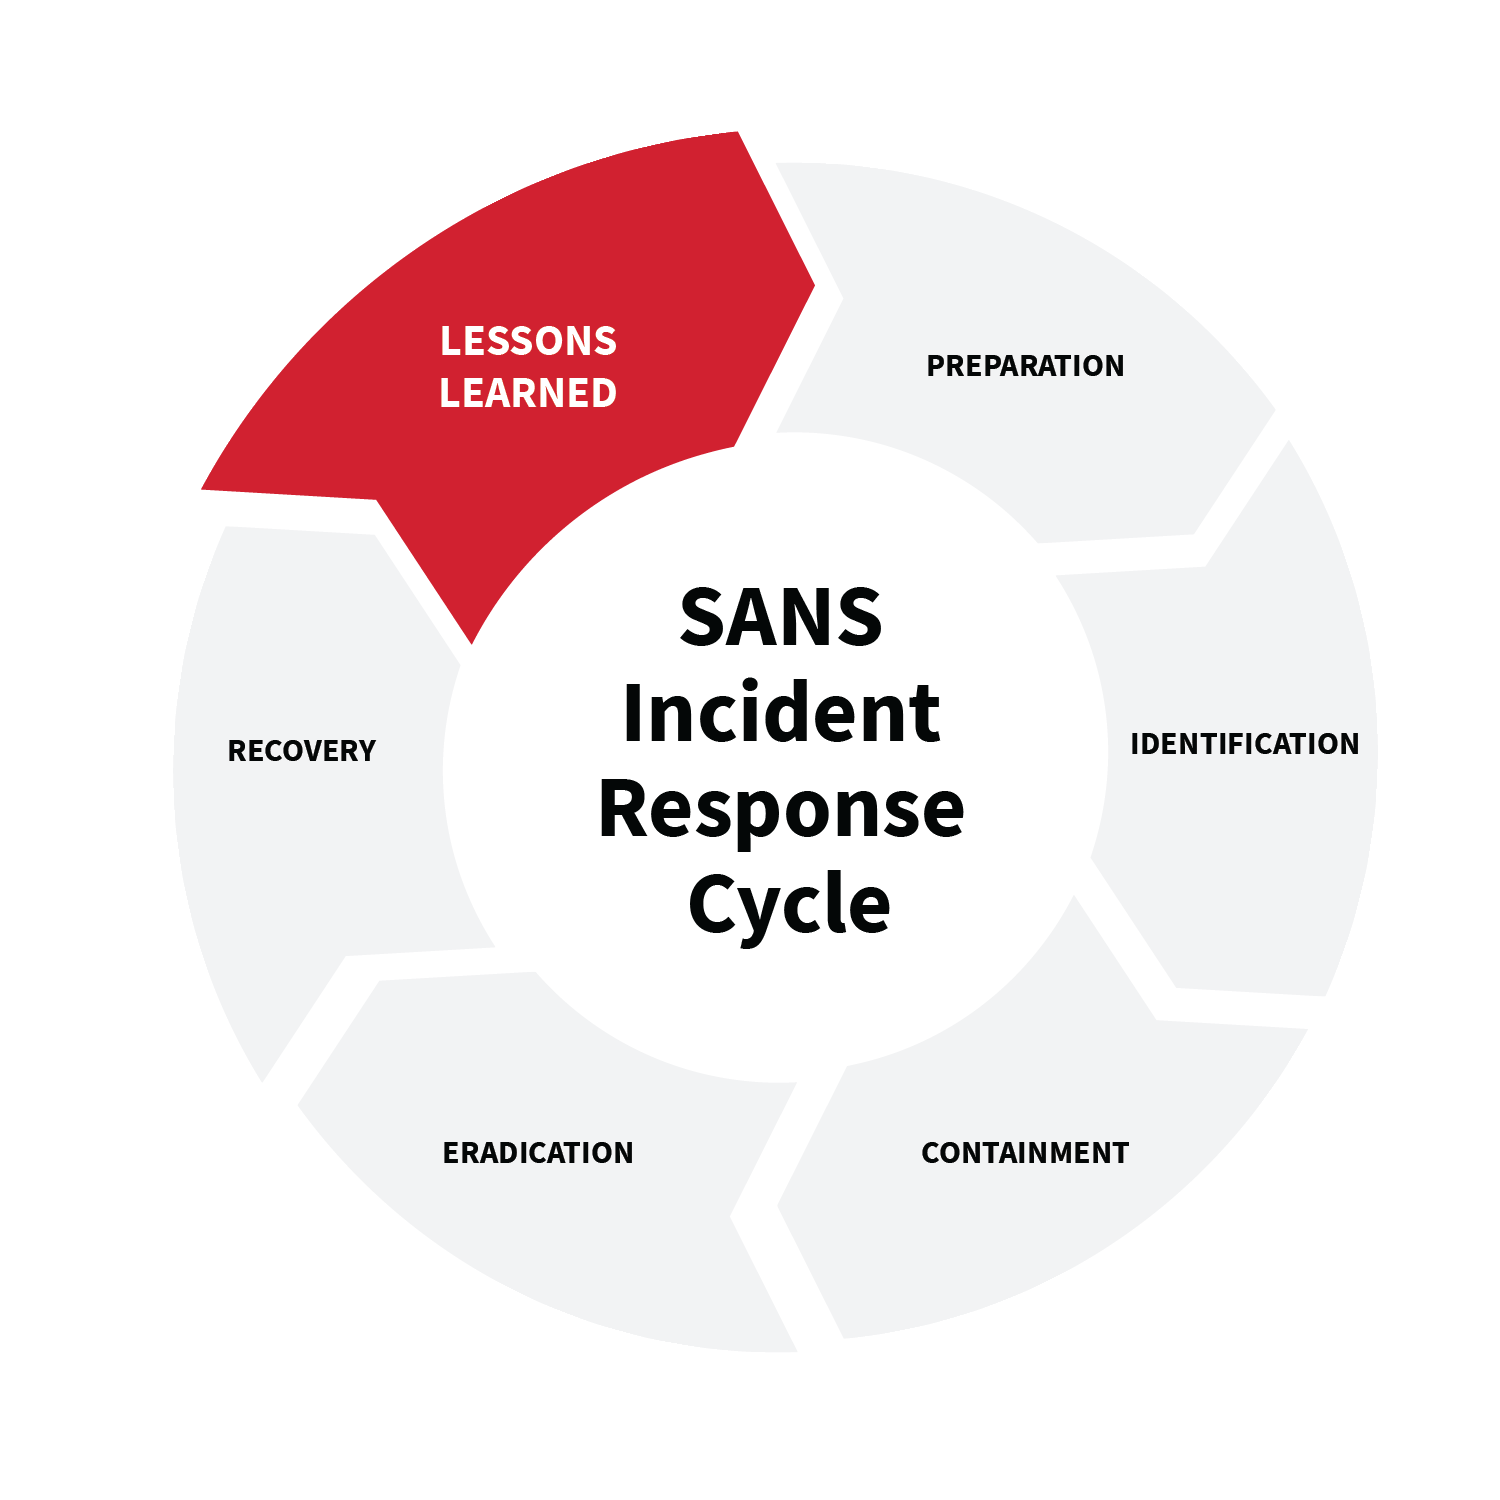 Lessons Learned is the final phase of the SANS incident response cycle